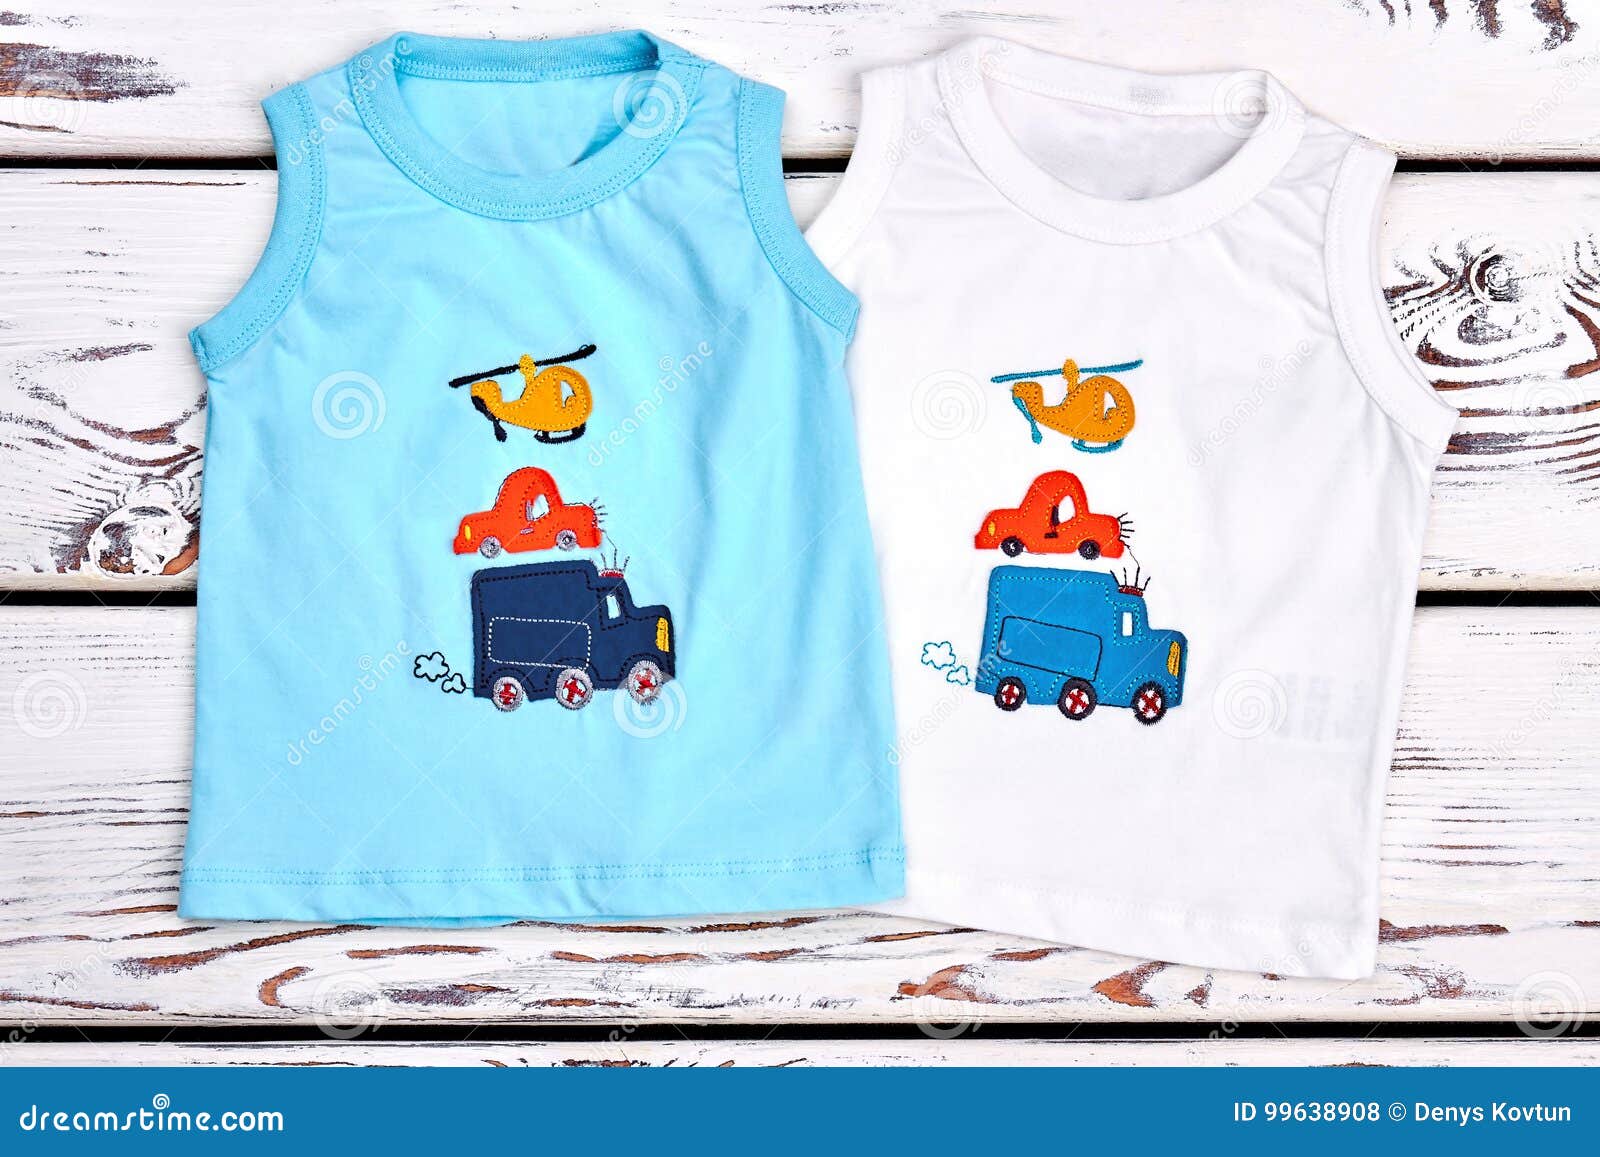 Set of Colored Printed T-shirts for Kids. Stock Photo - Image of ...